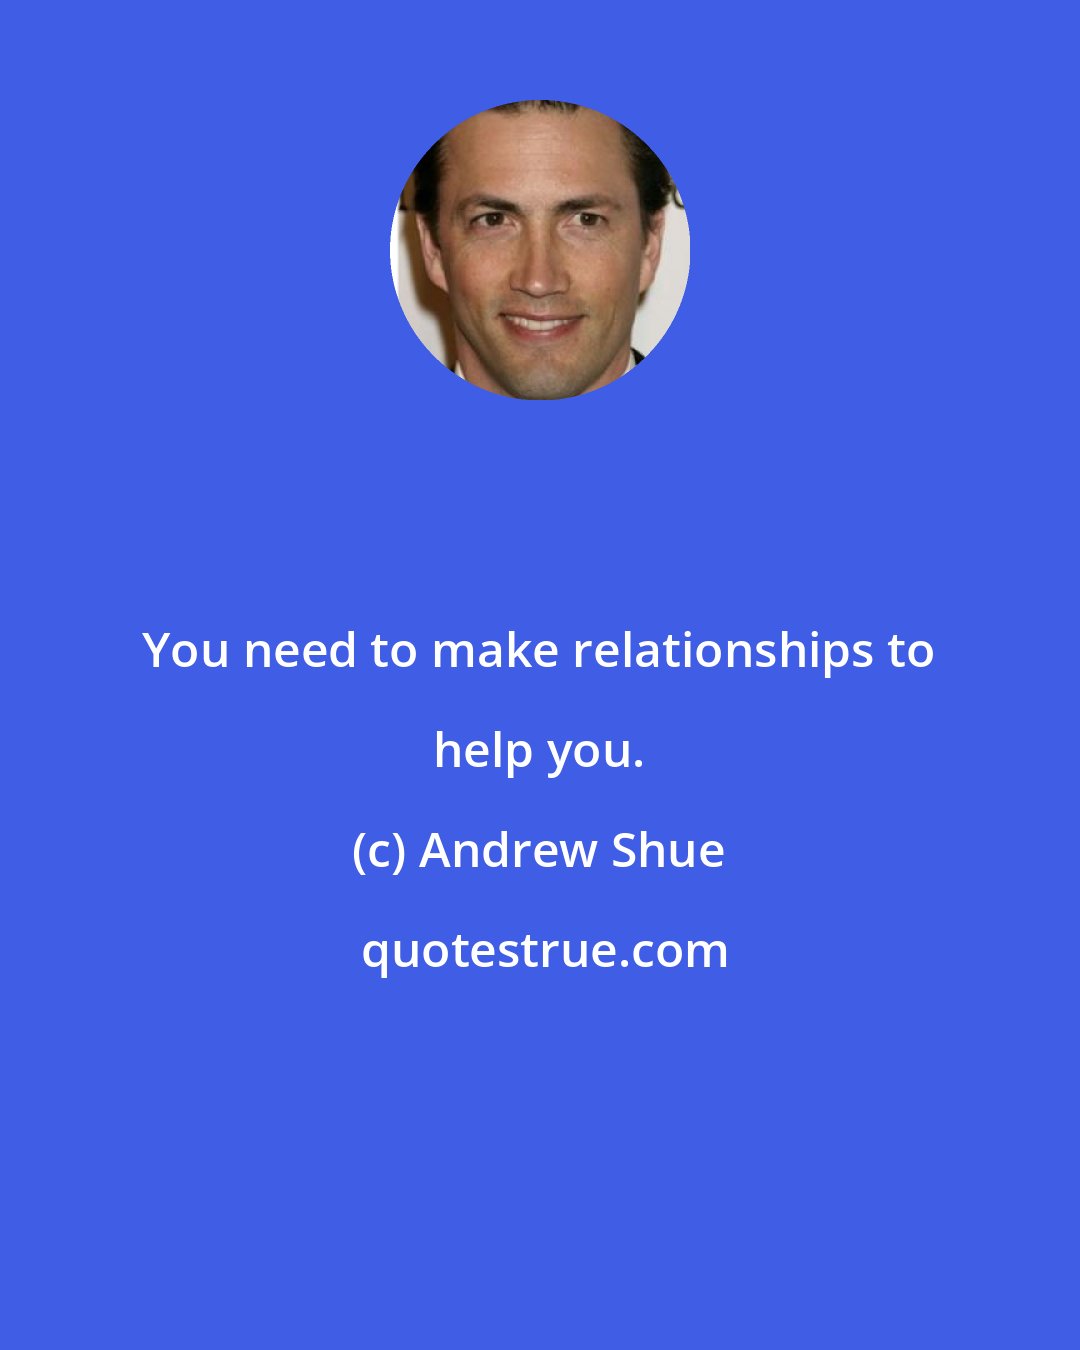 Andrew Shue: You need to make relationships to help you.